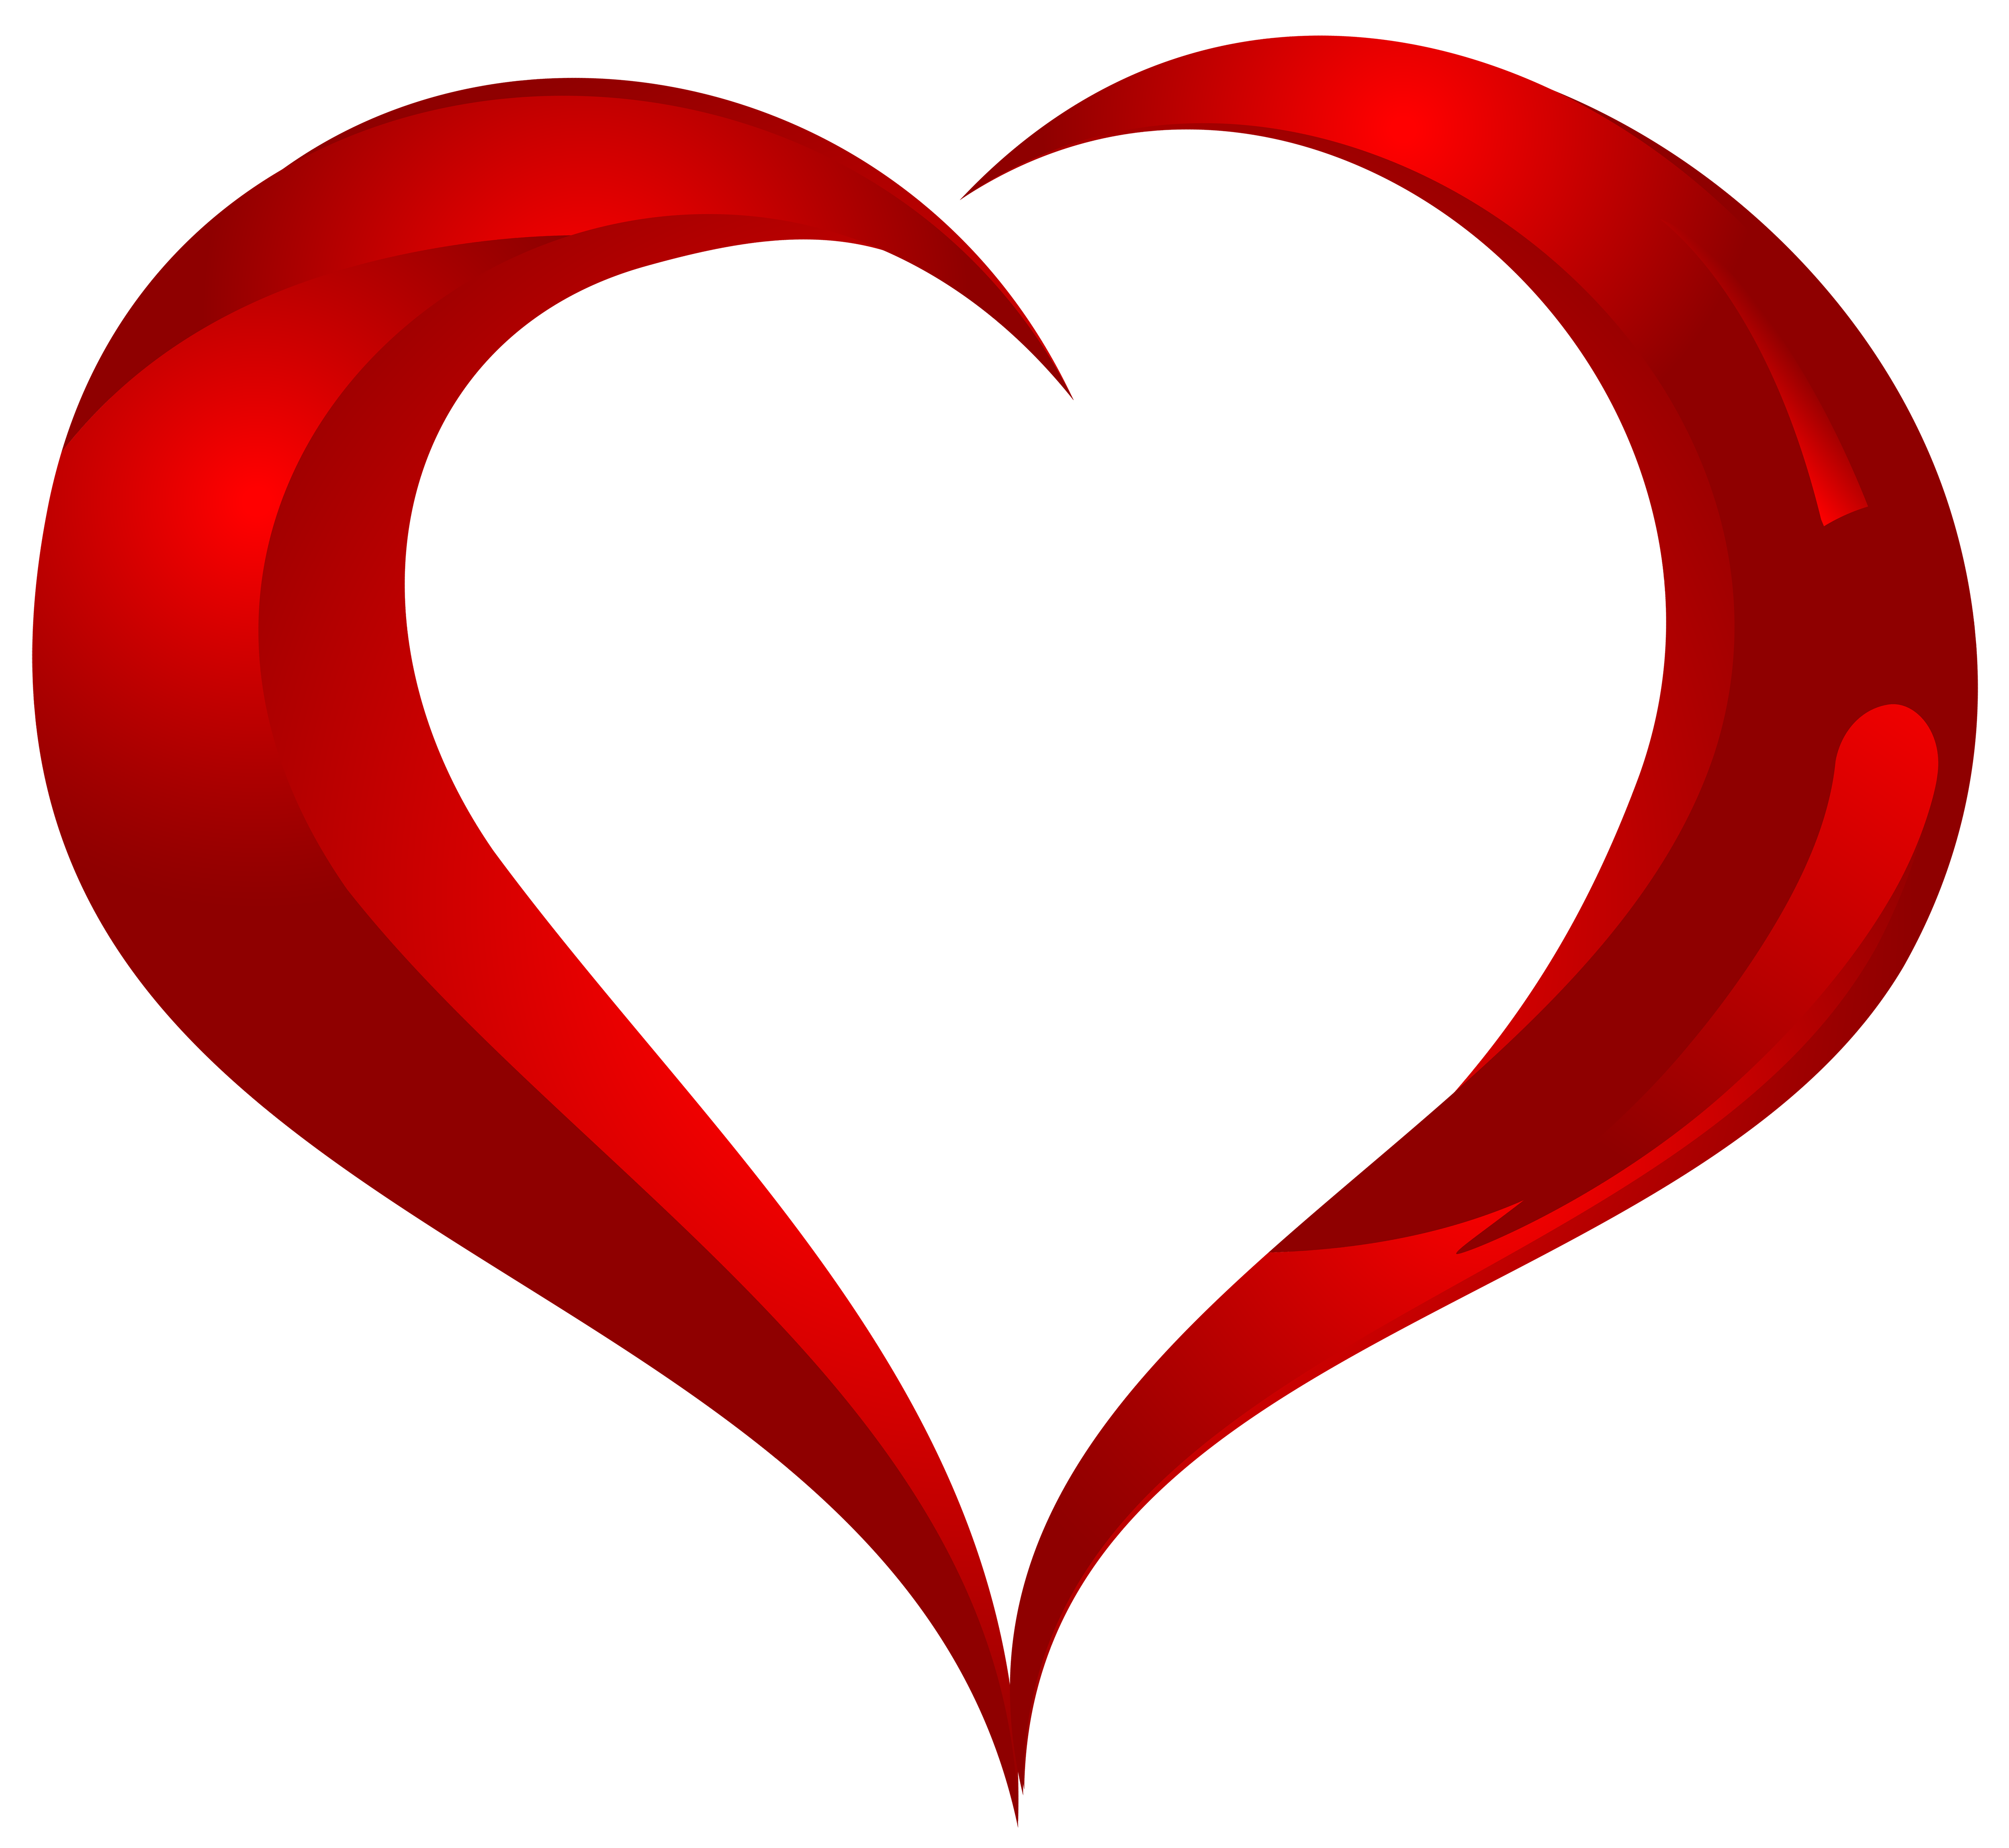 png format heart images